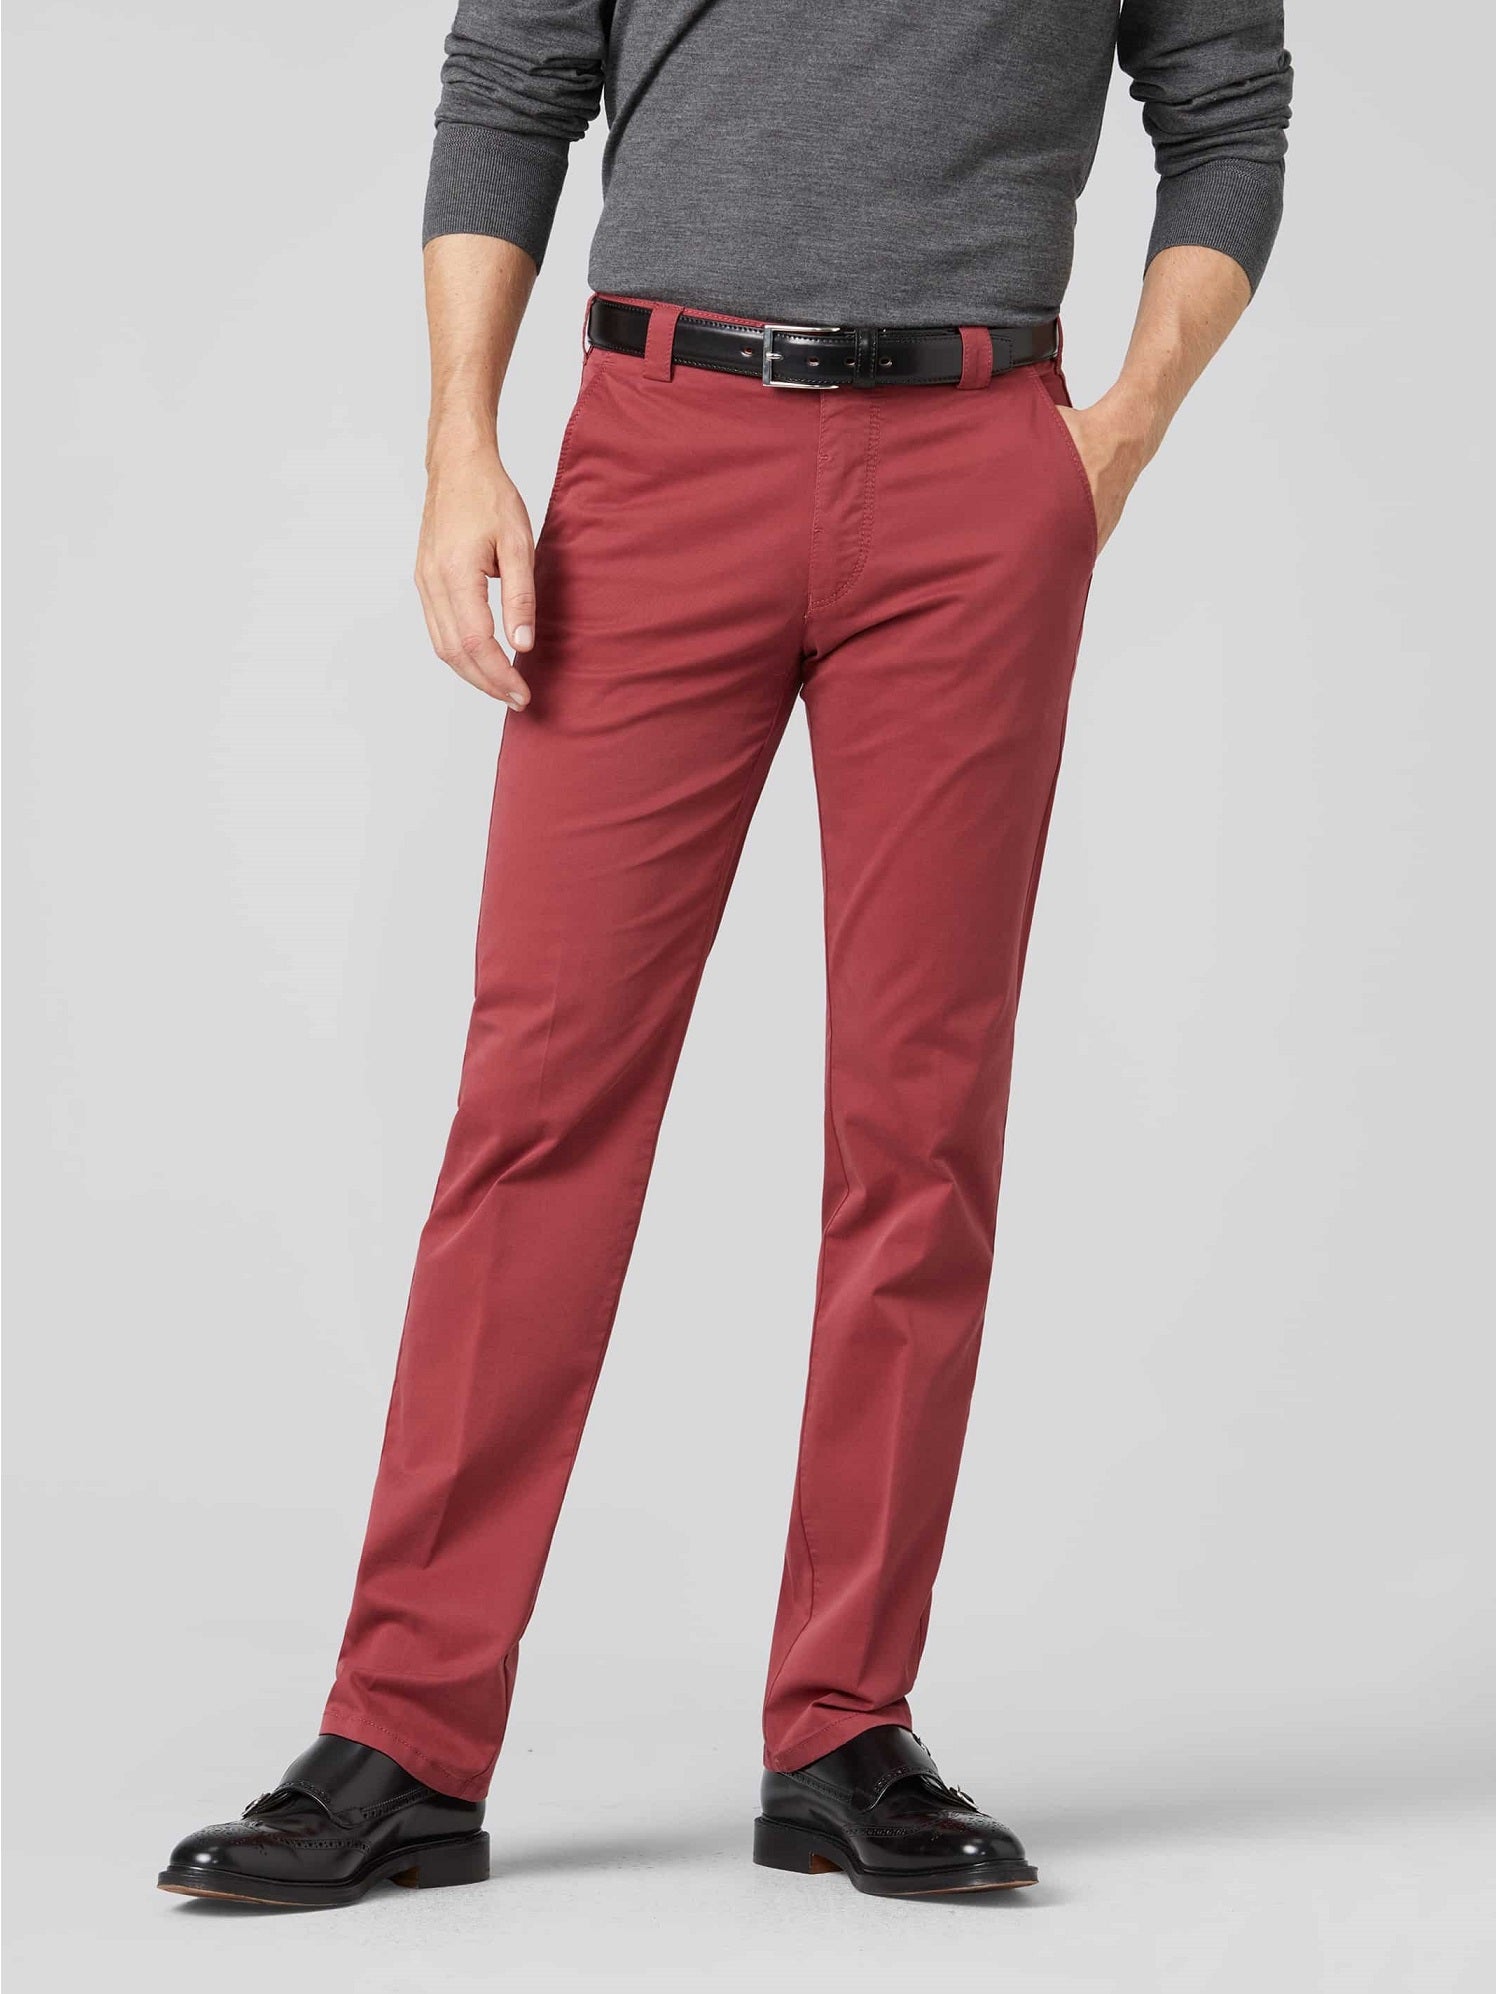 Trousers Buy Trousers Starts Rs199 Online at Best Prices in India  Free  Shipping